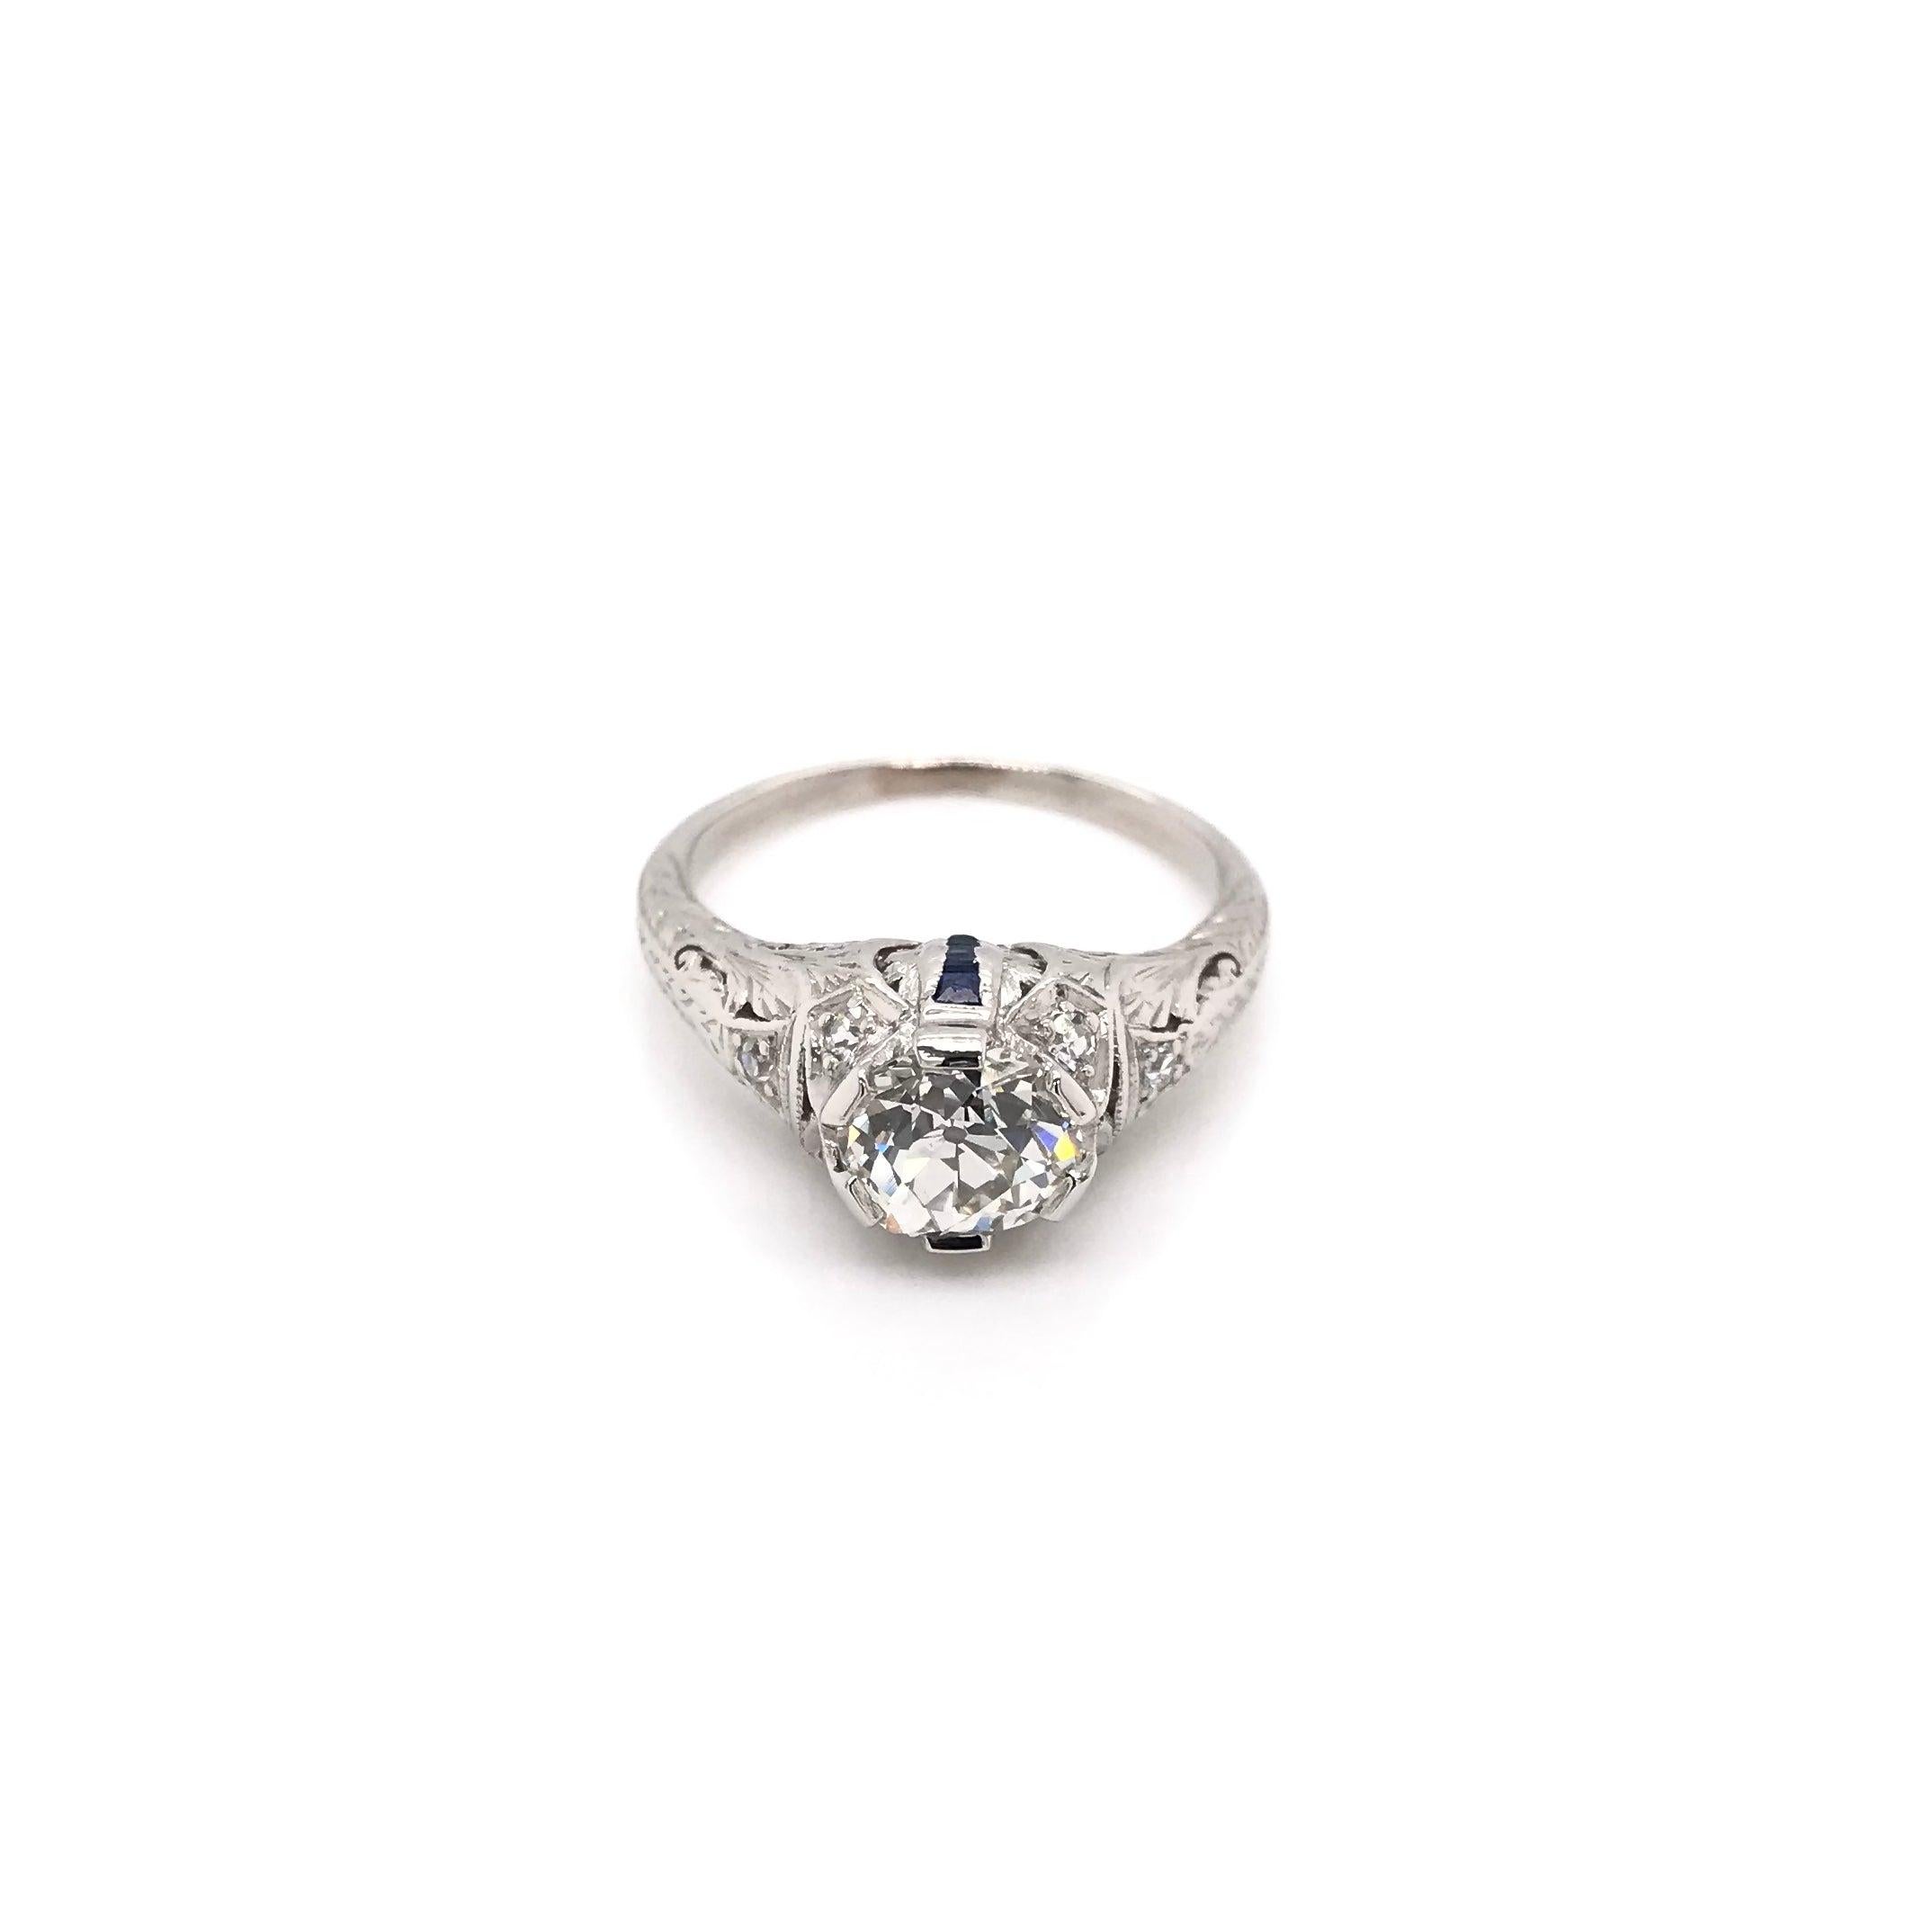 This antique piece was handcrafted sometime during the Art Deco design period ( 1920-1940 ). The setting is 18k white gold and features quite a few enchanting Art Deco design elements. The center diamond is an old mine cut measuring approximately